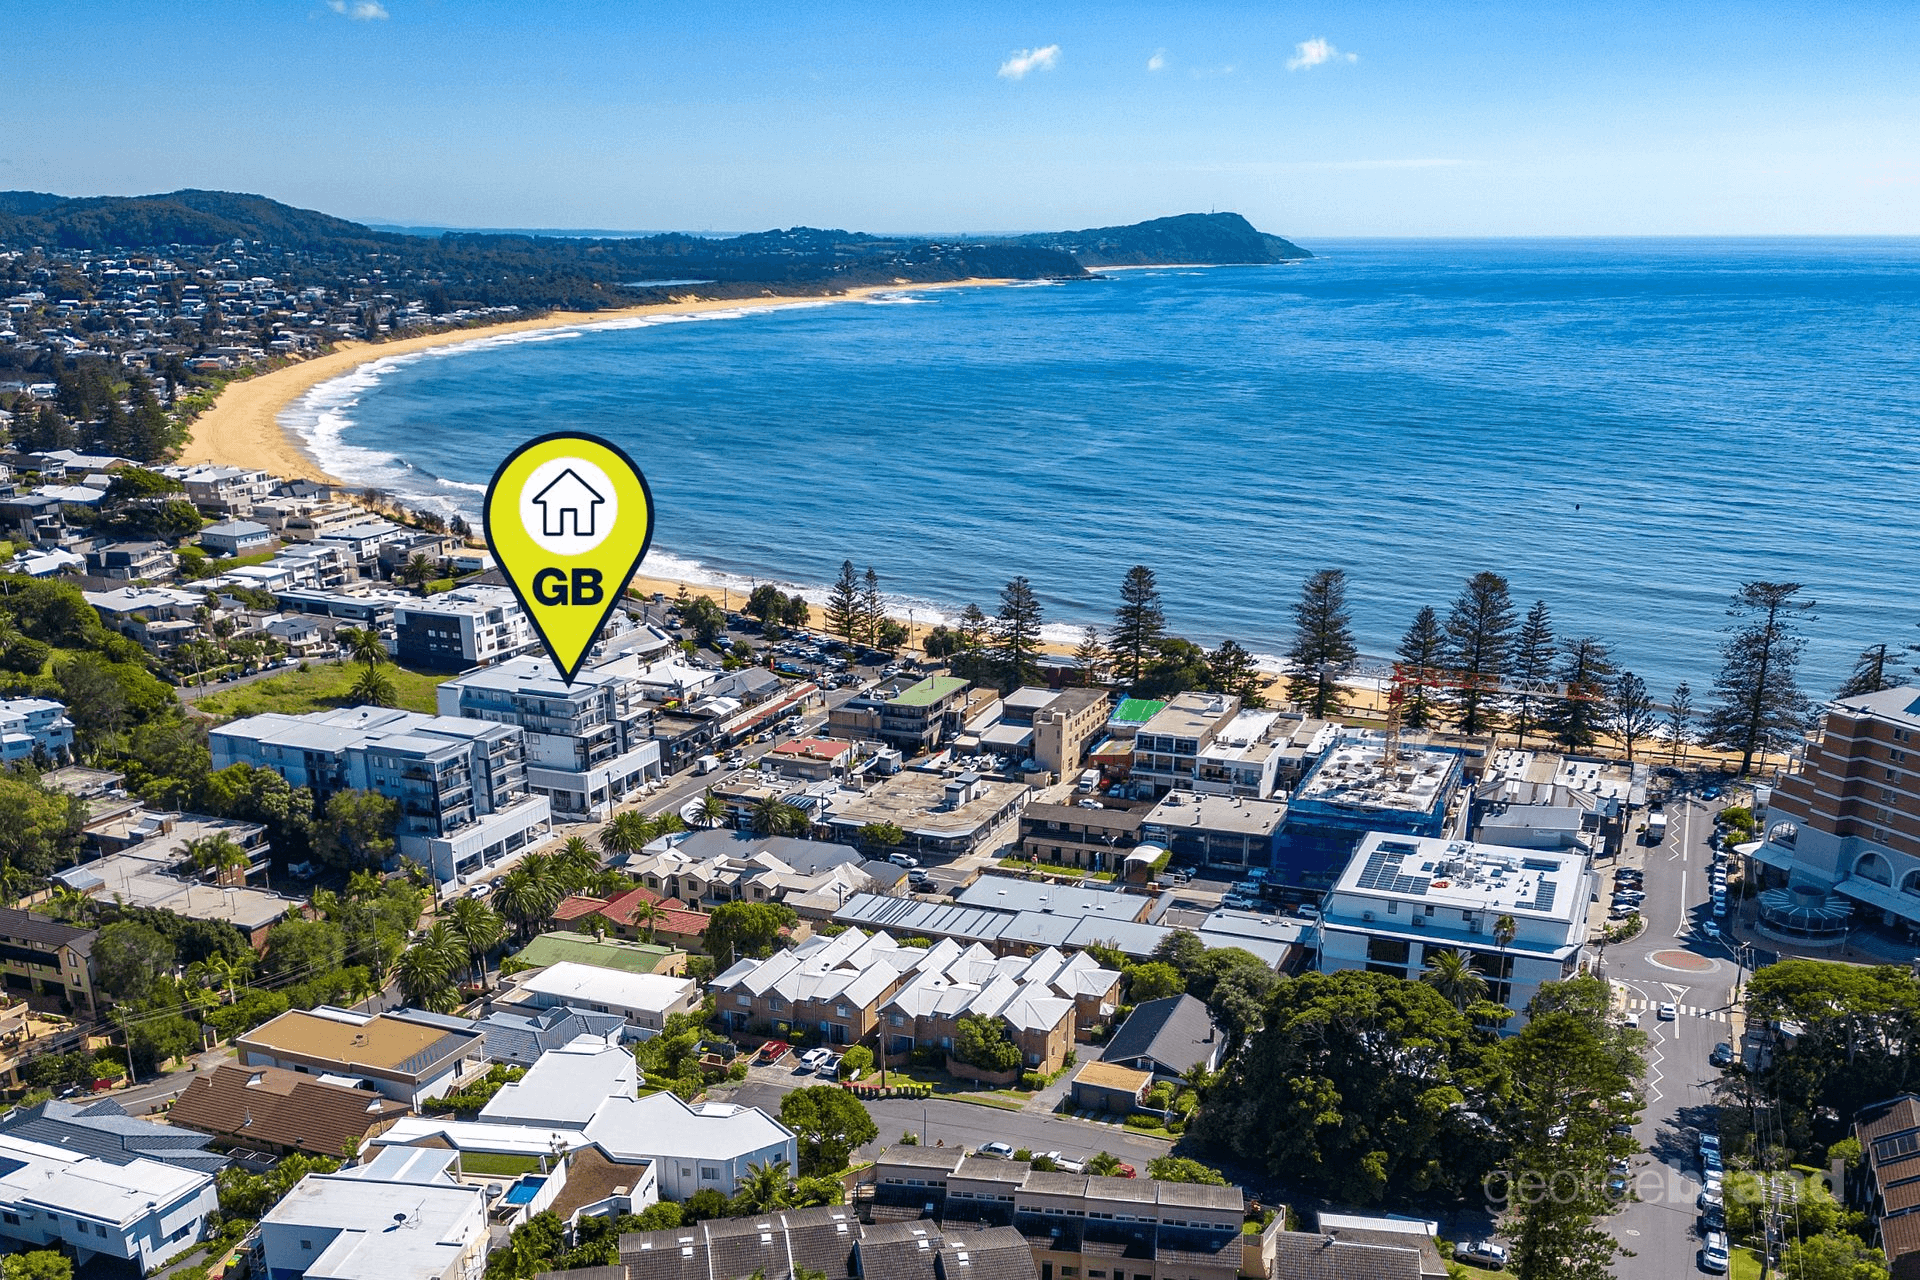 13/5 Campbell Crescent, Terrigal, NSW 2260